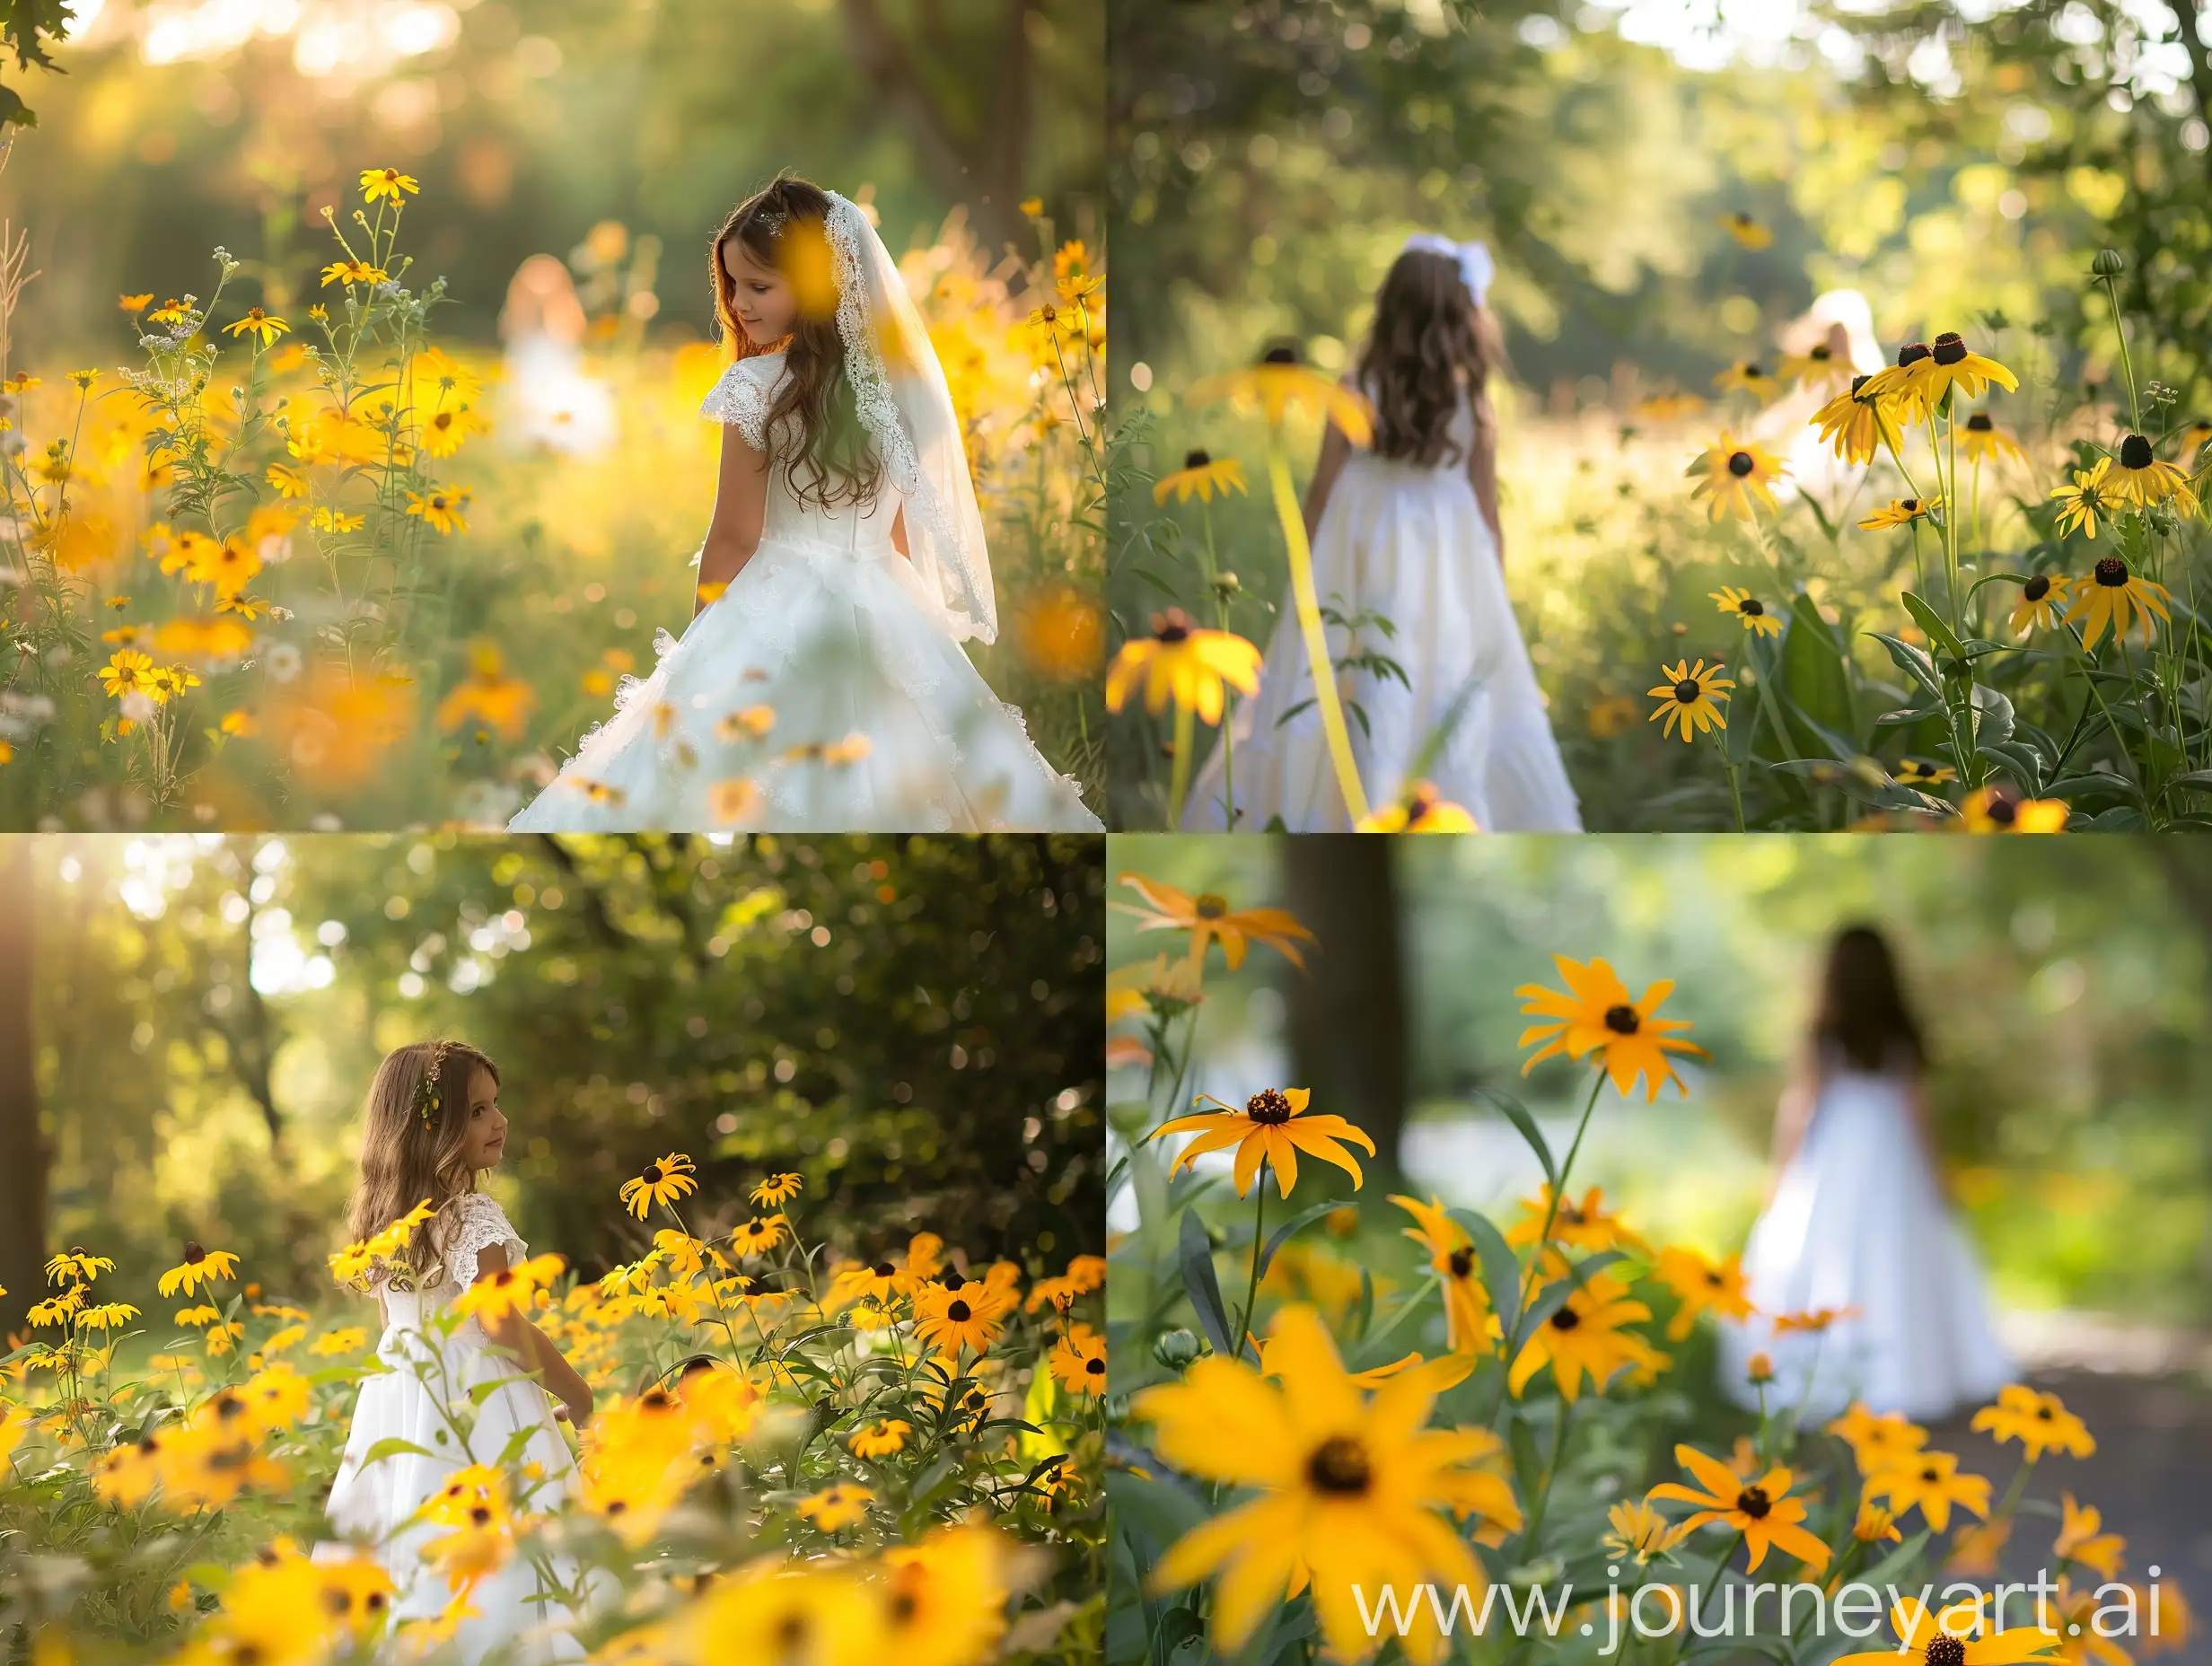 First-Communion-Portrait-Session-in-Park-with-Yellow-Flowers